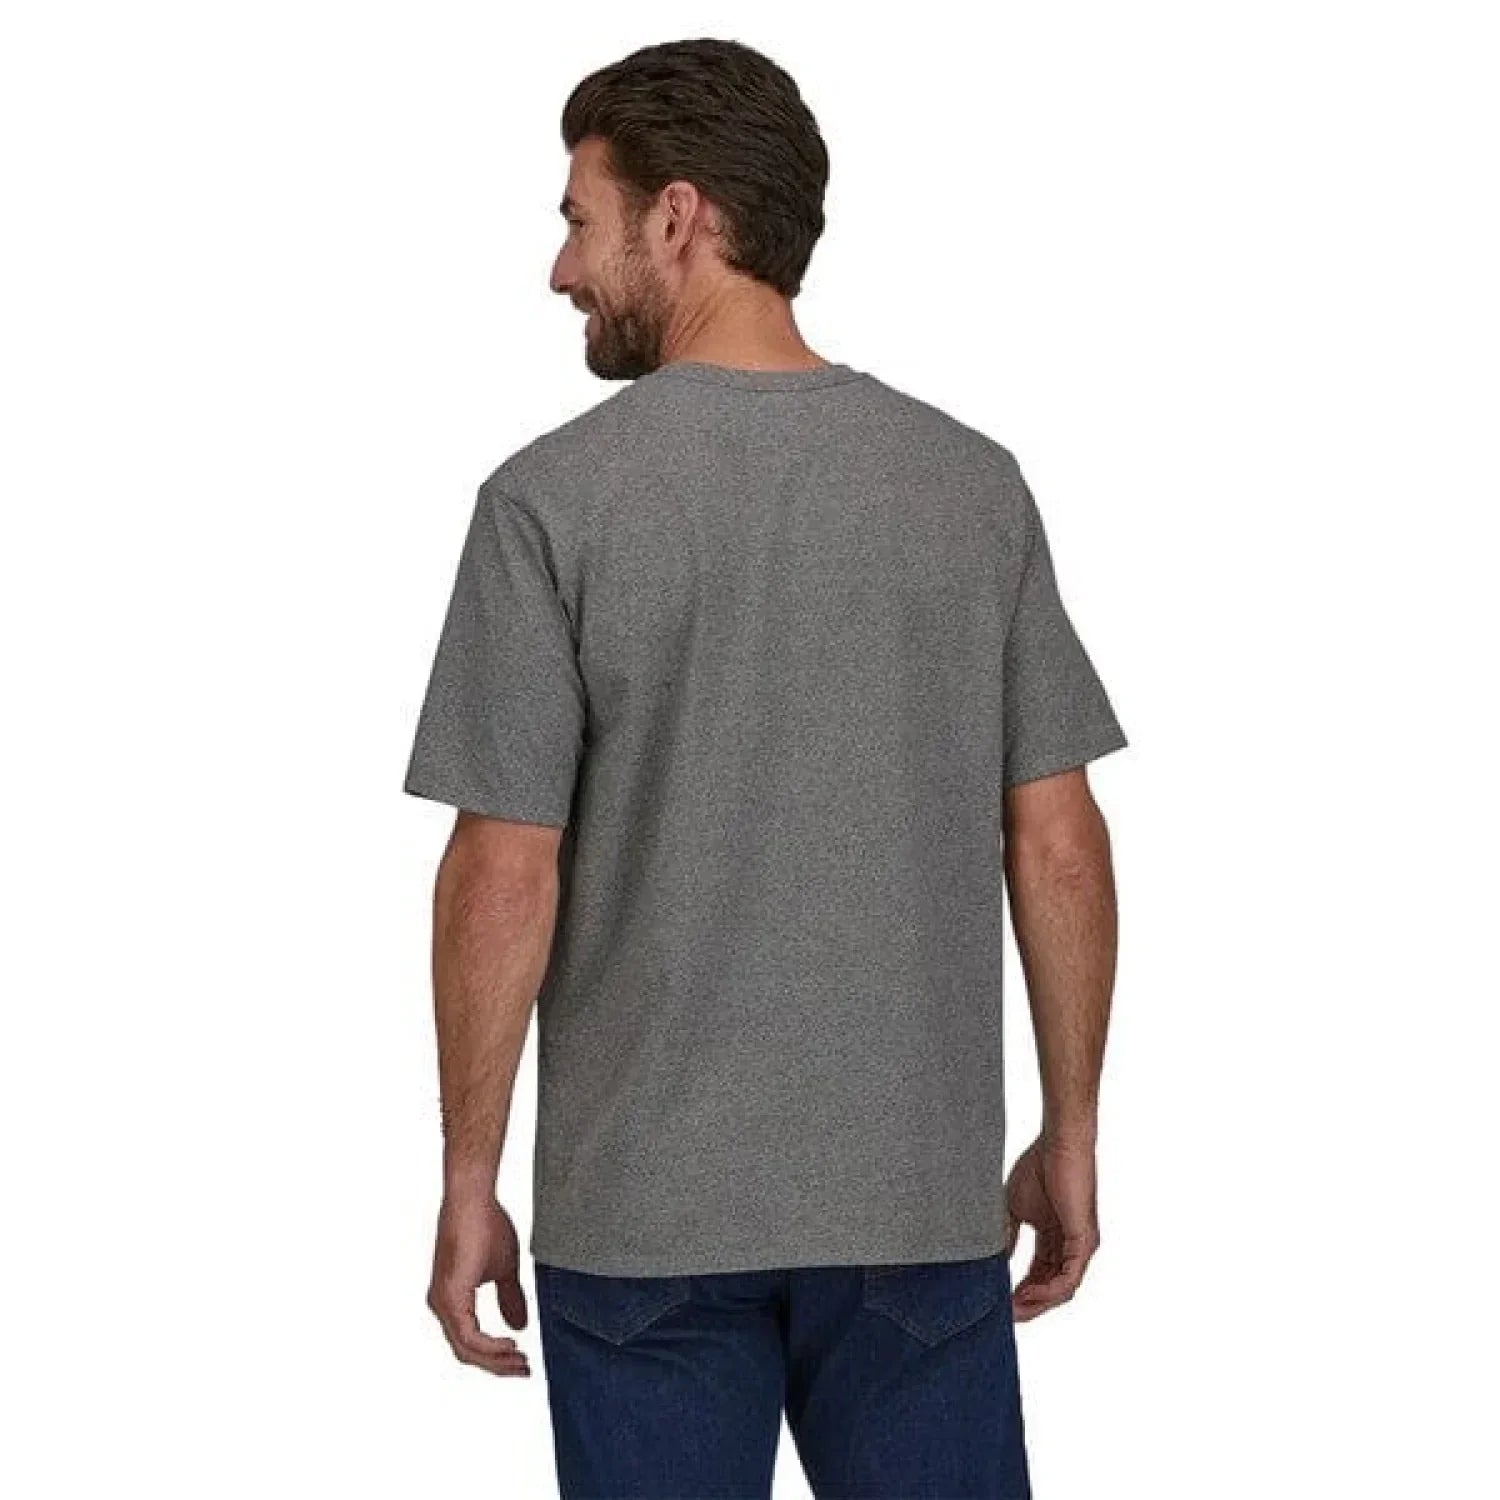 Patagonia 01. MENS APPAREL - MENS T-SHIRTS - MENS T-SHIRT SS Men's Take A Stand Responsibili-Tee WIGH WILD GRIZZ | GRAVEL HEATHER